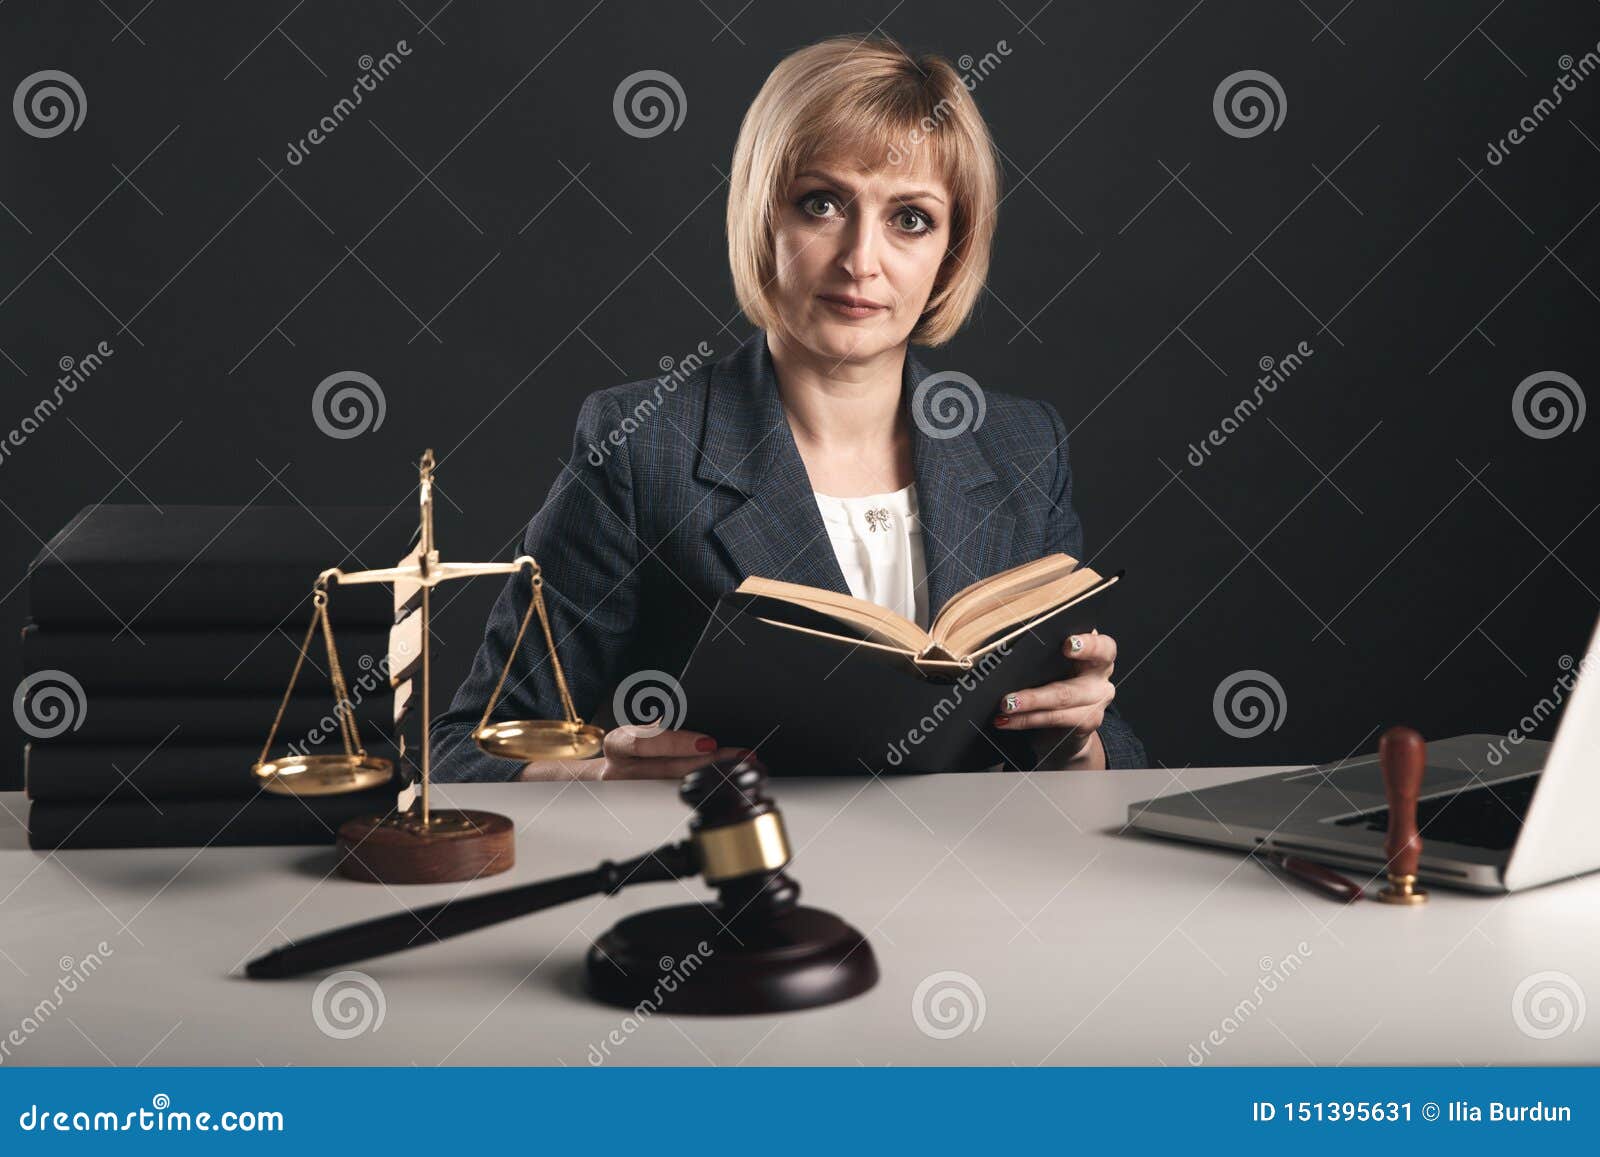 female advocate with juridical books at her workplace. gavel and libra on the desk.